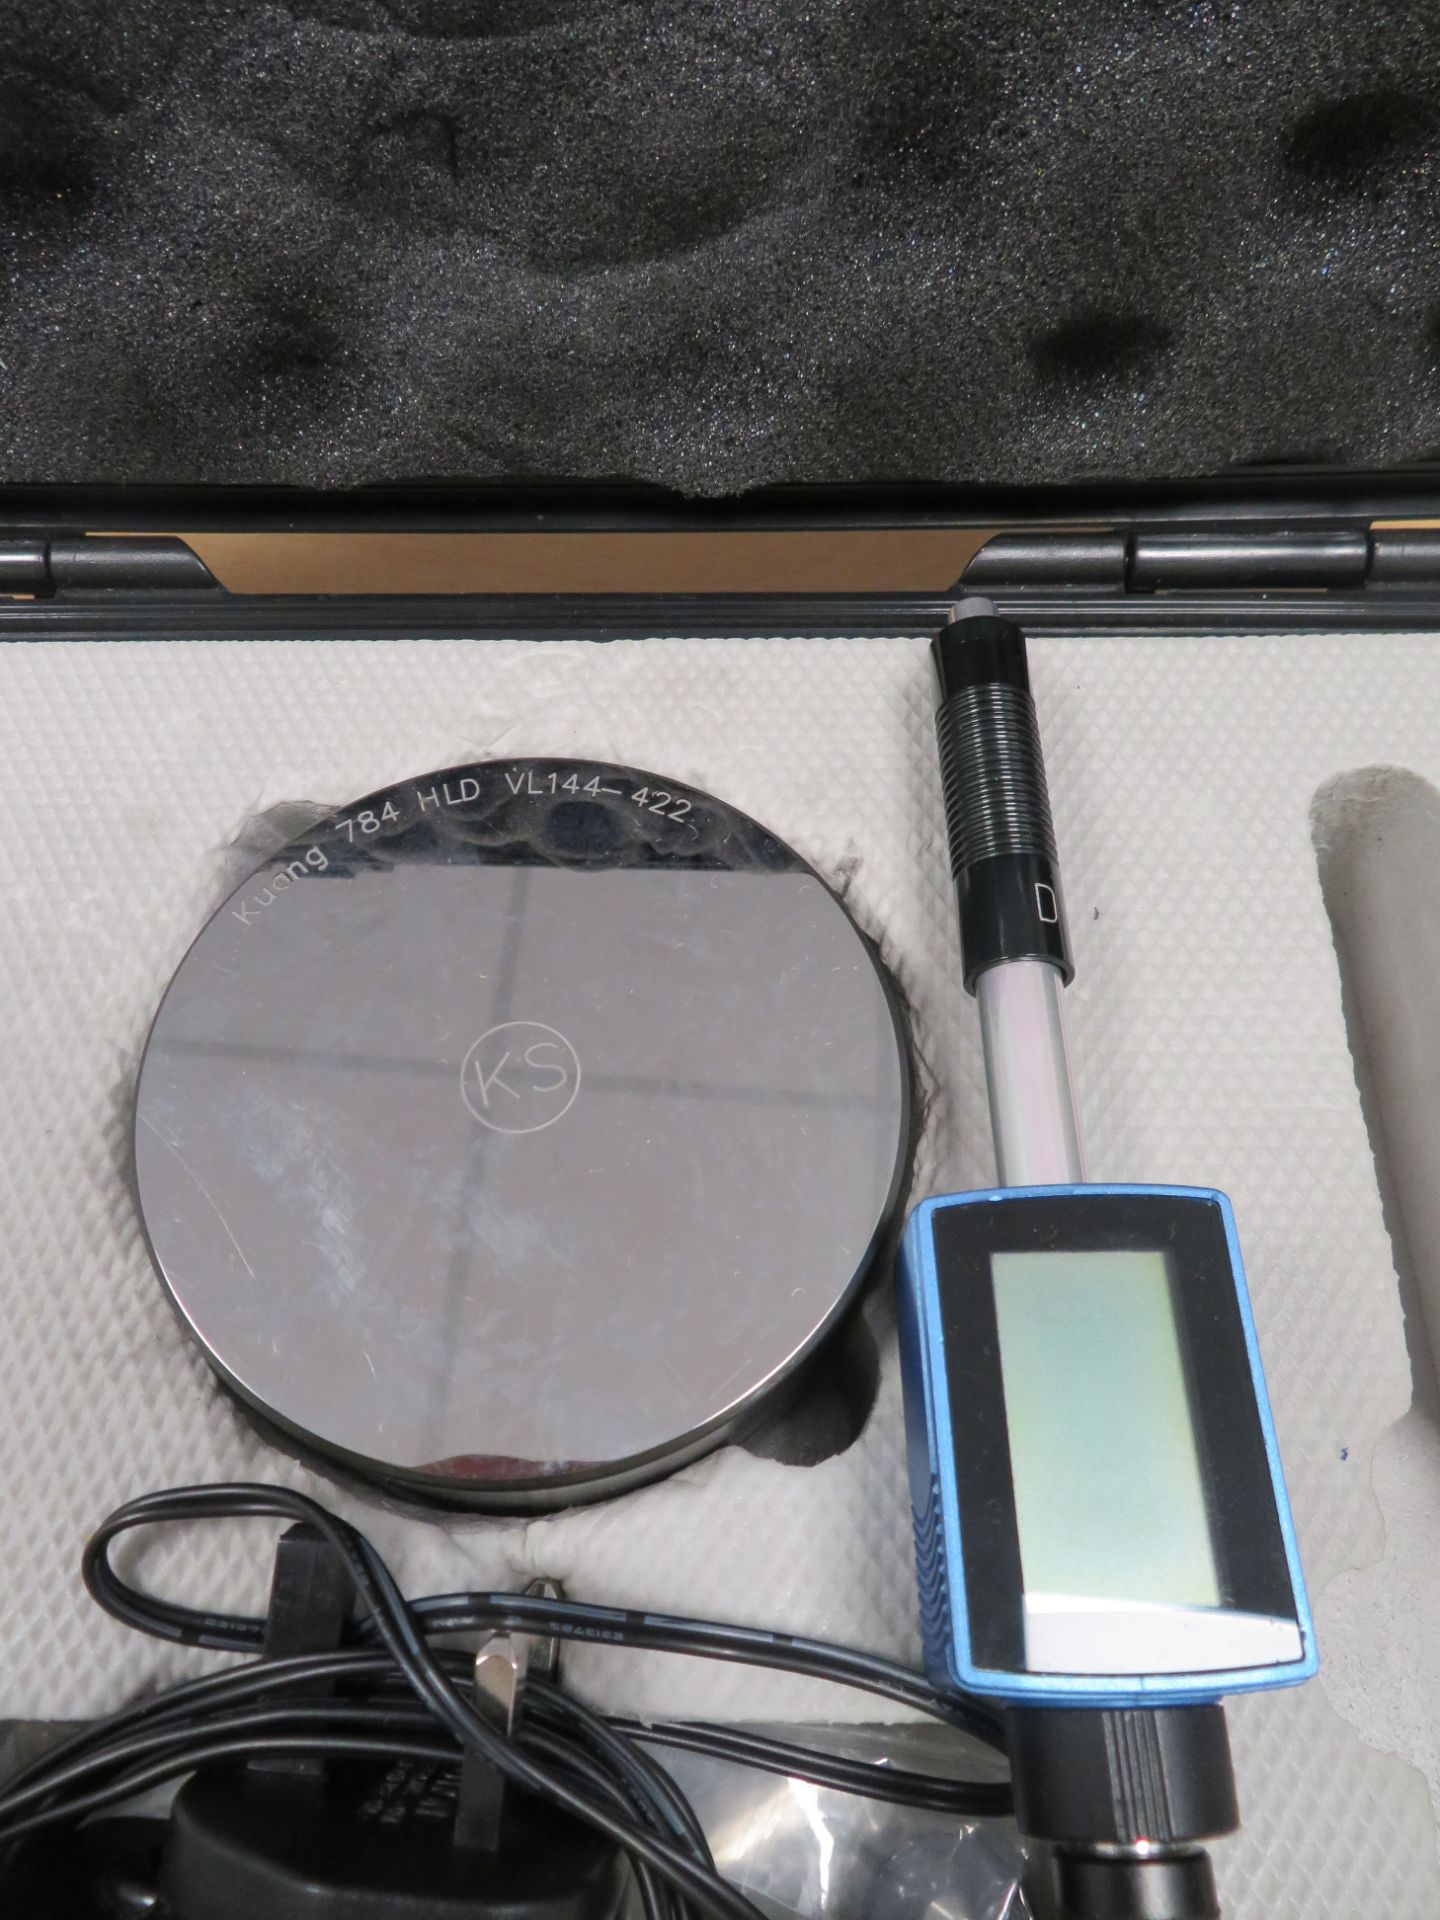 Hardness Tester Kit in carry case - Image 2 of 4